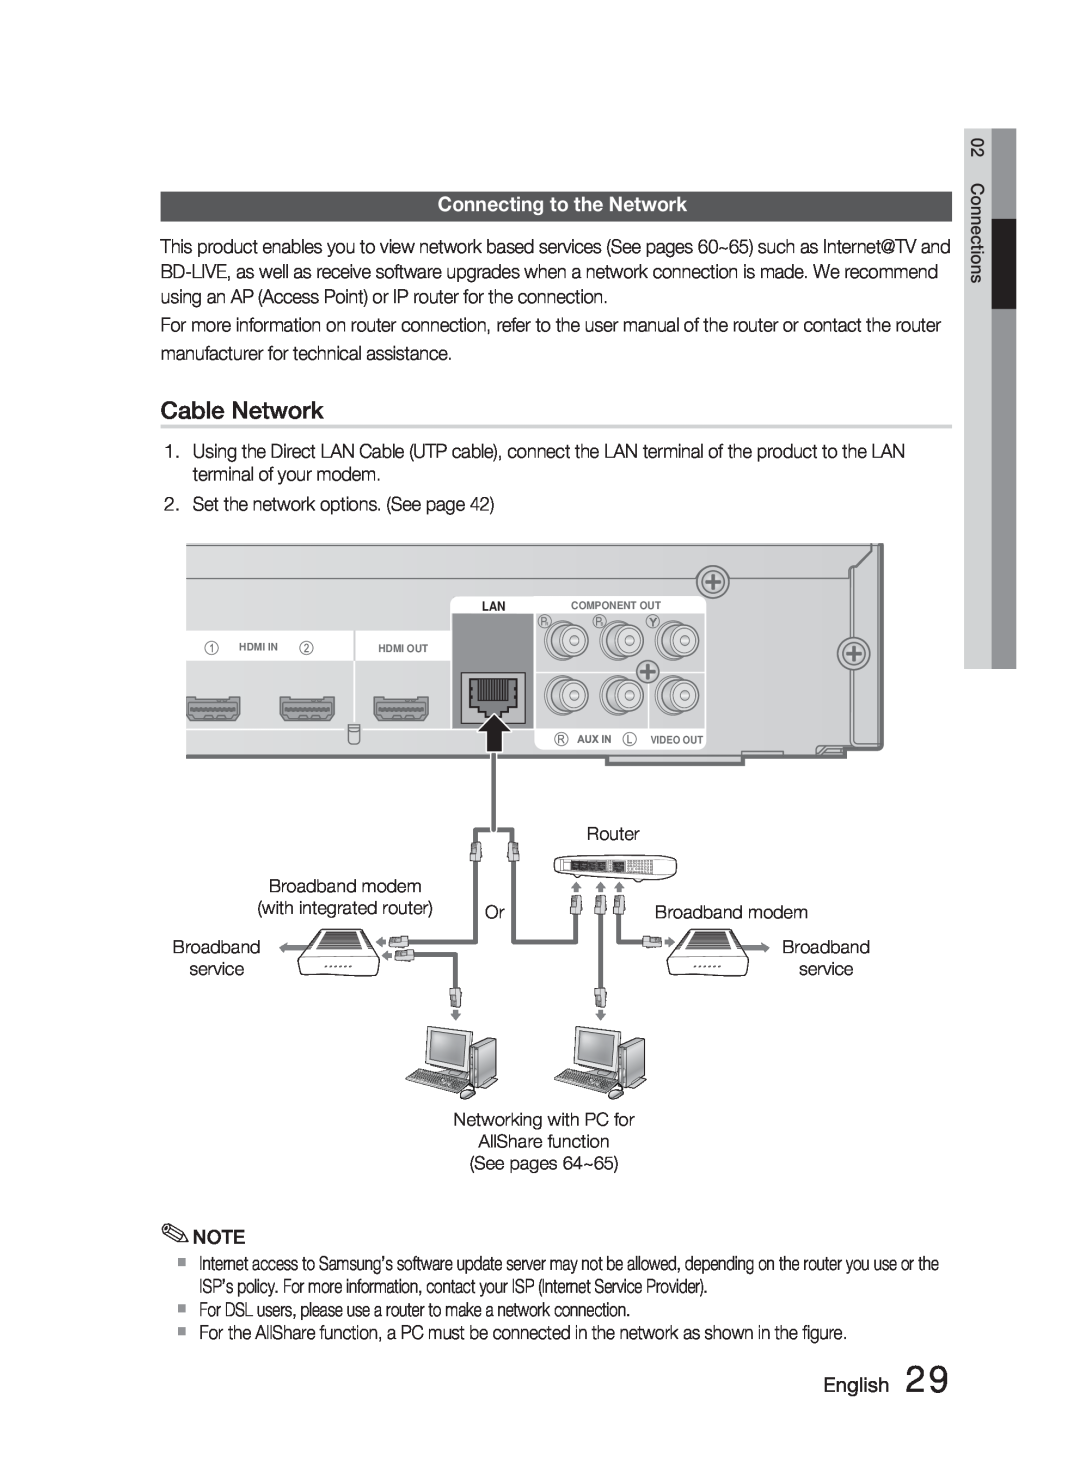 Samsung AH68-02279Y user manual Cable Network, Connecting to the Network, English 